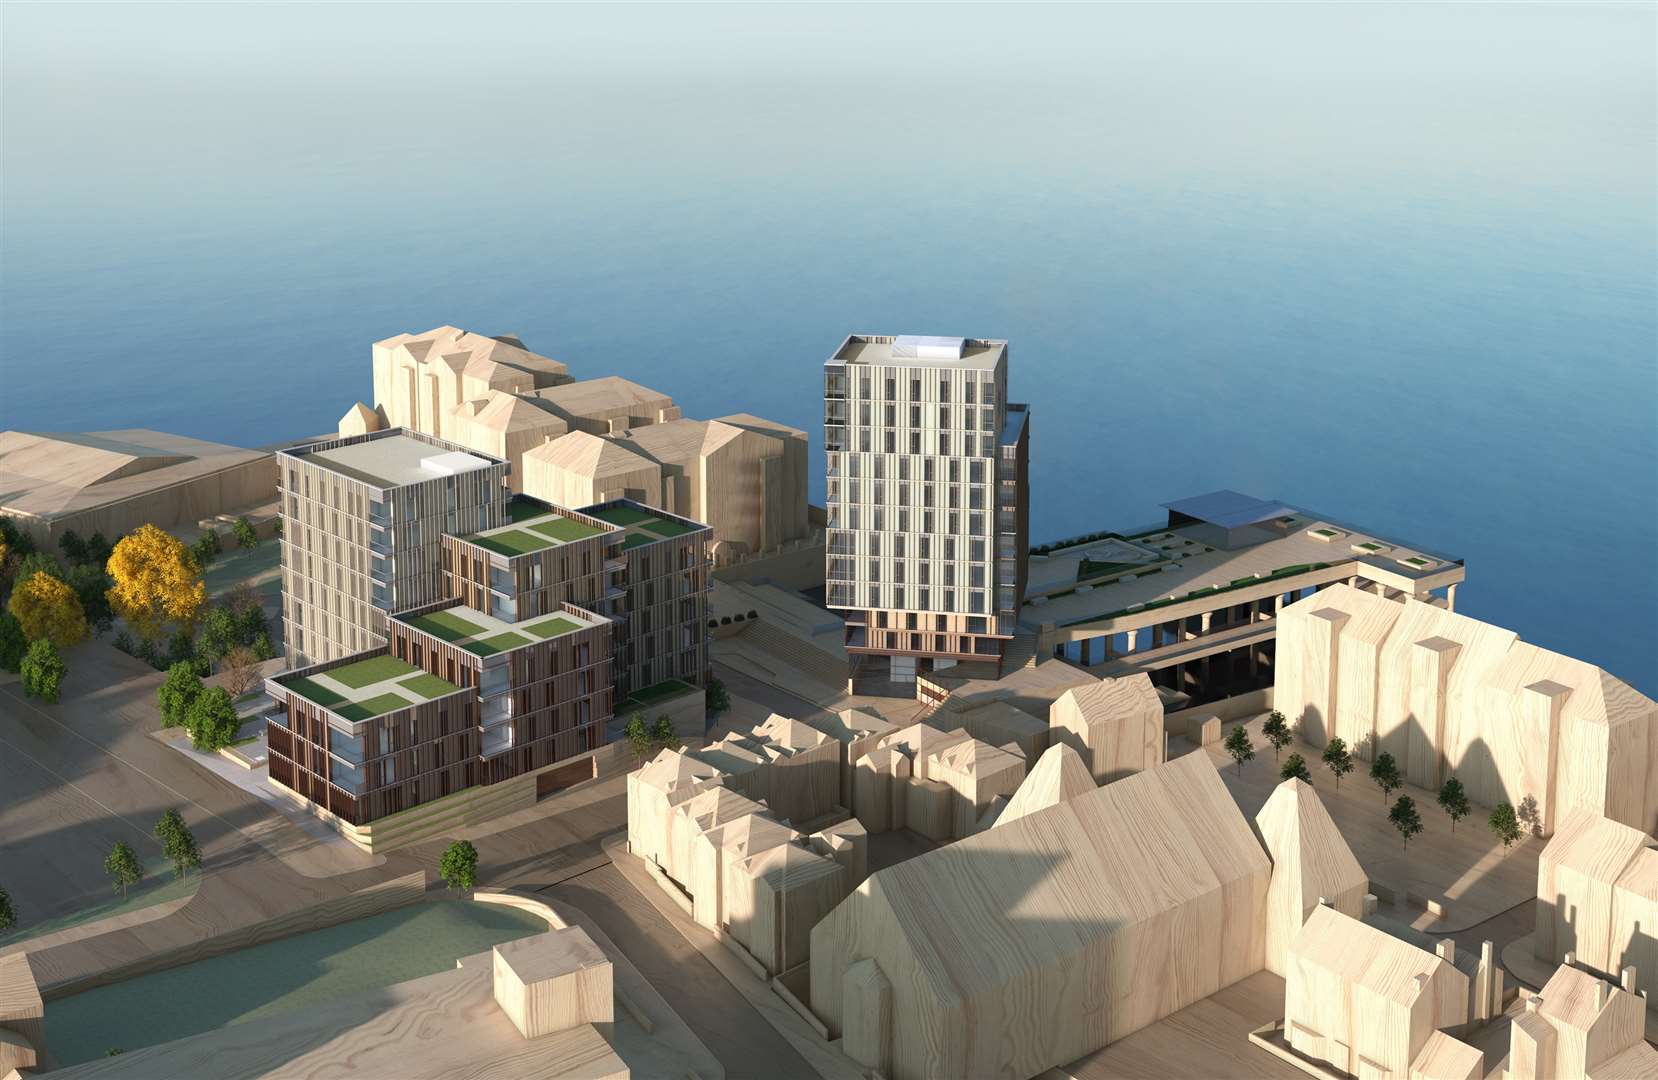 A view of the proposed scheme